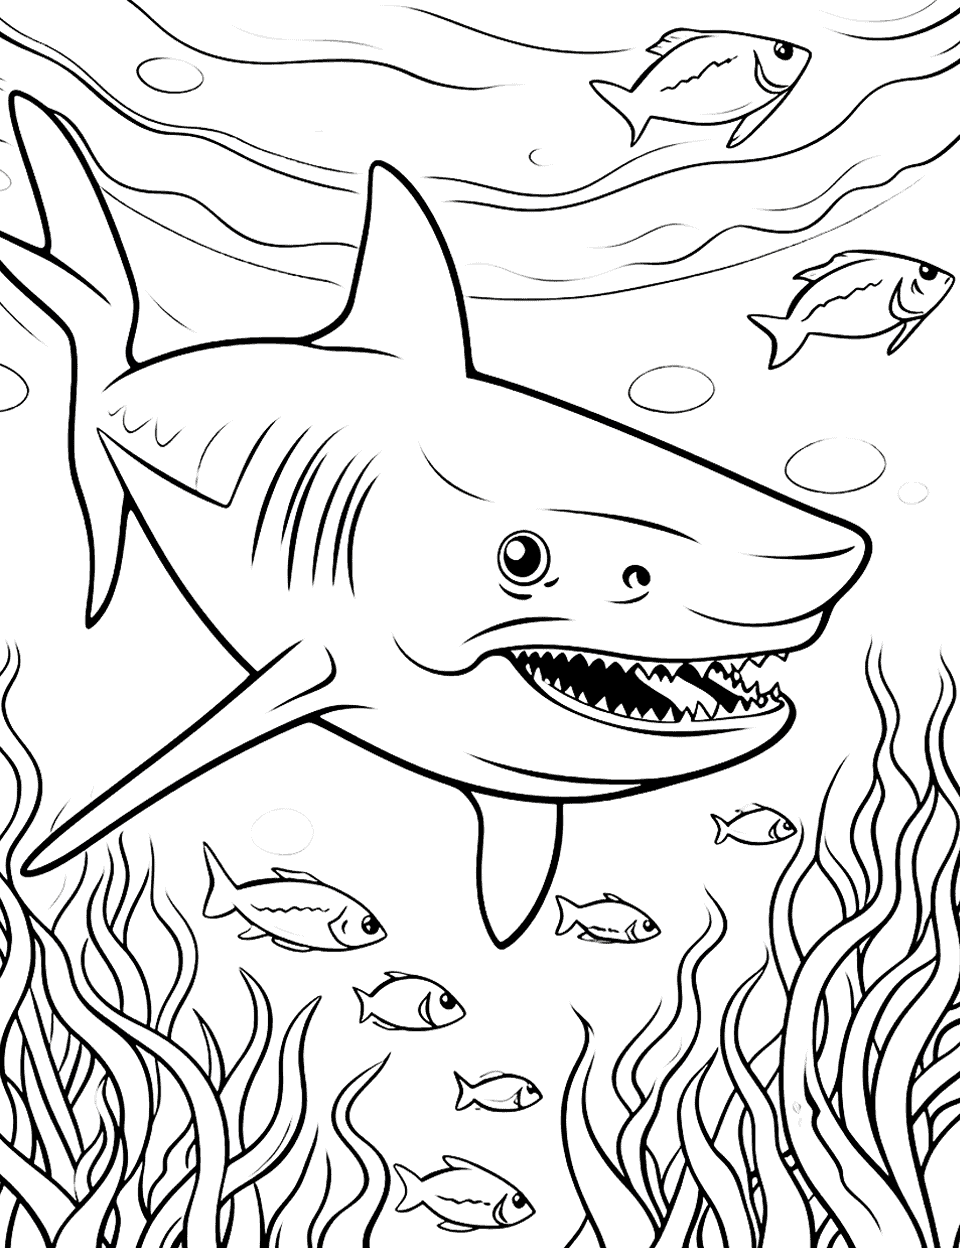 Tiger Shark's Coral Maze Shark Coloring Page - A tiger shark trying to navigate through a complex coral maze.